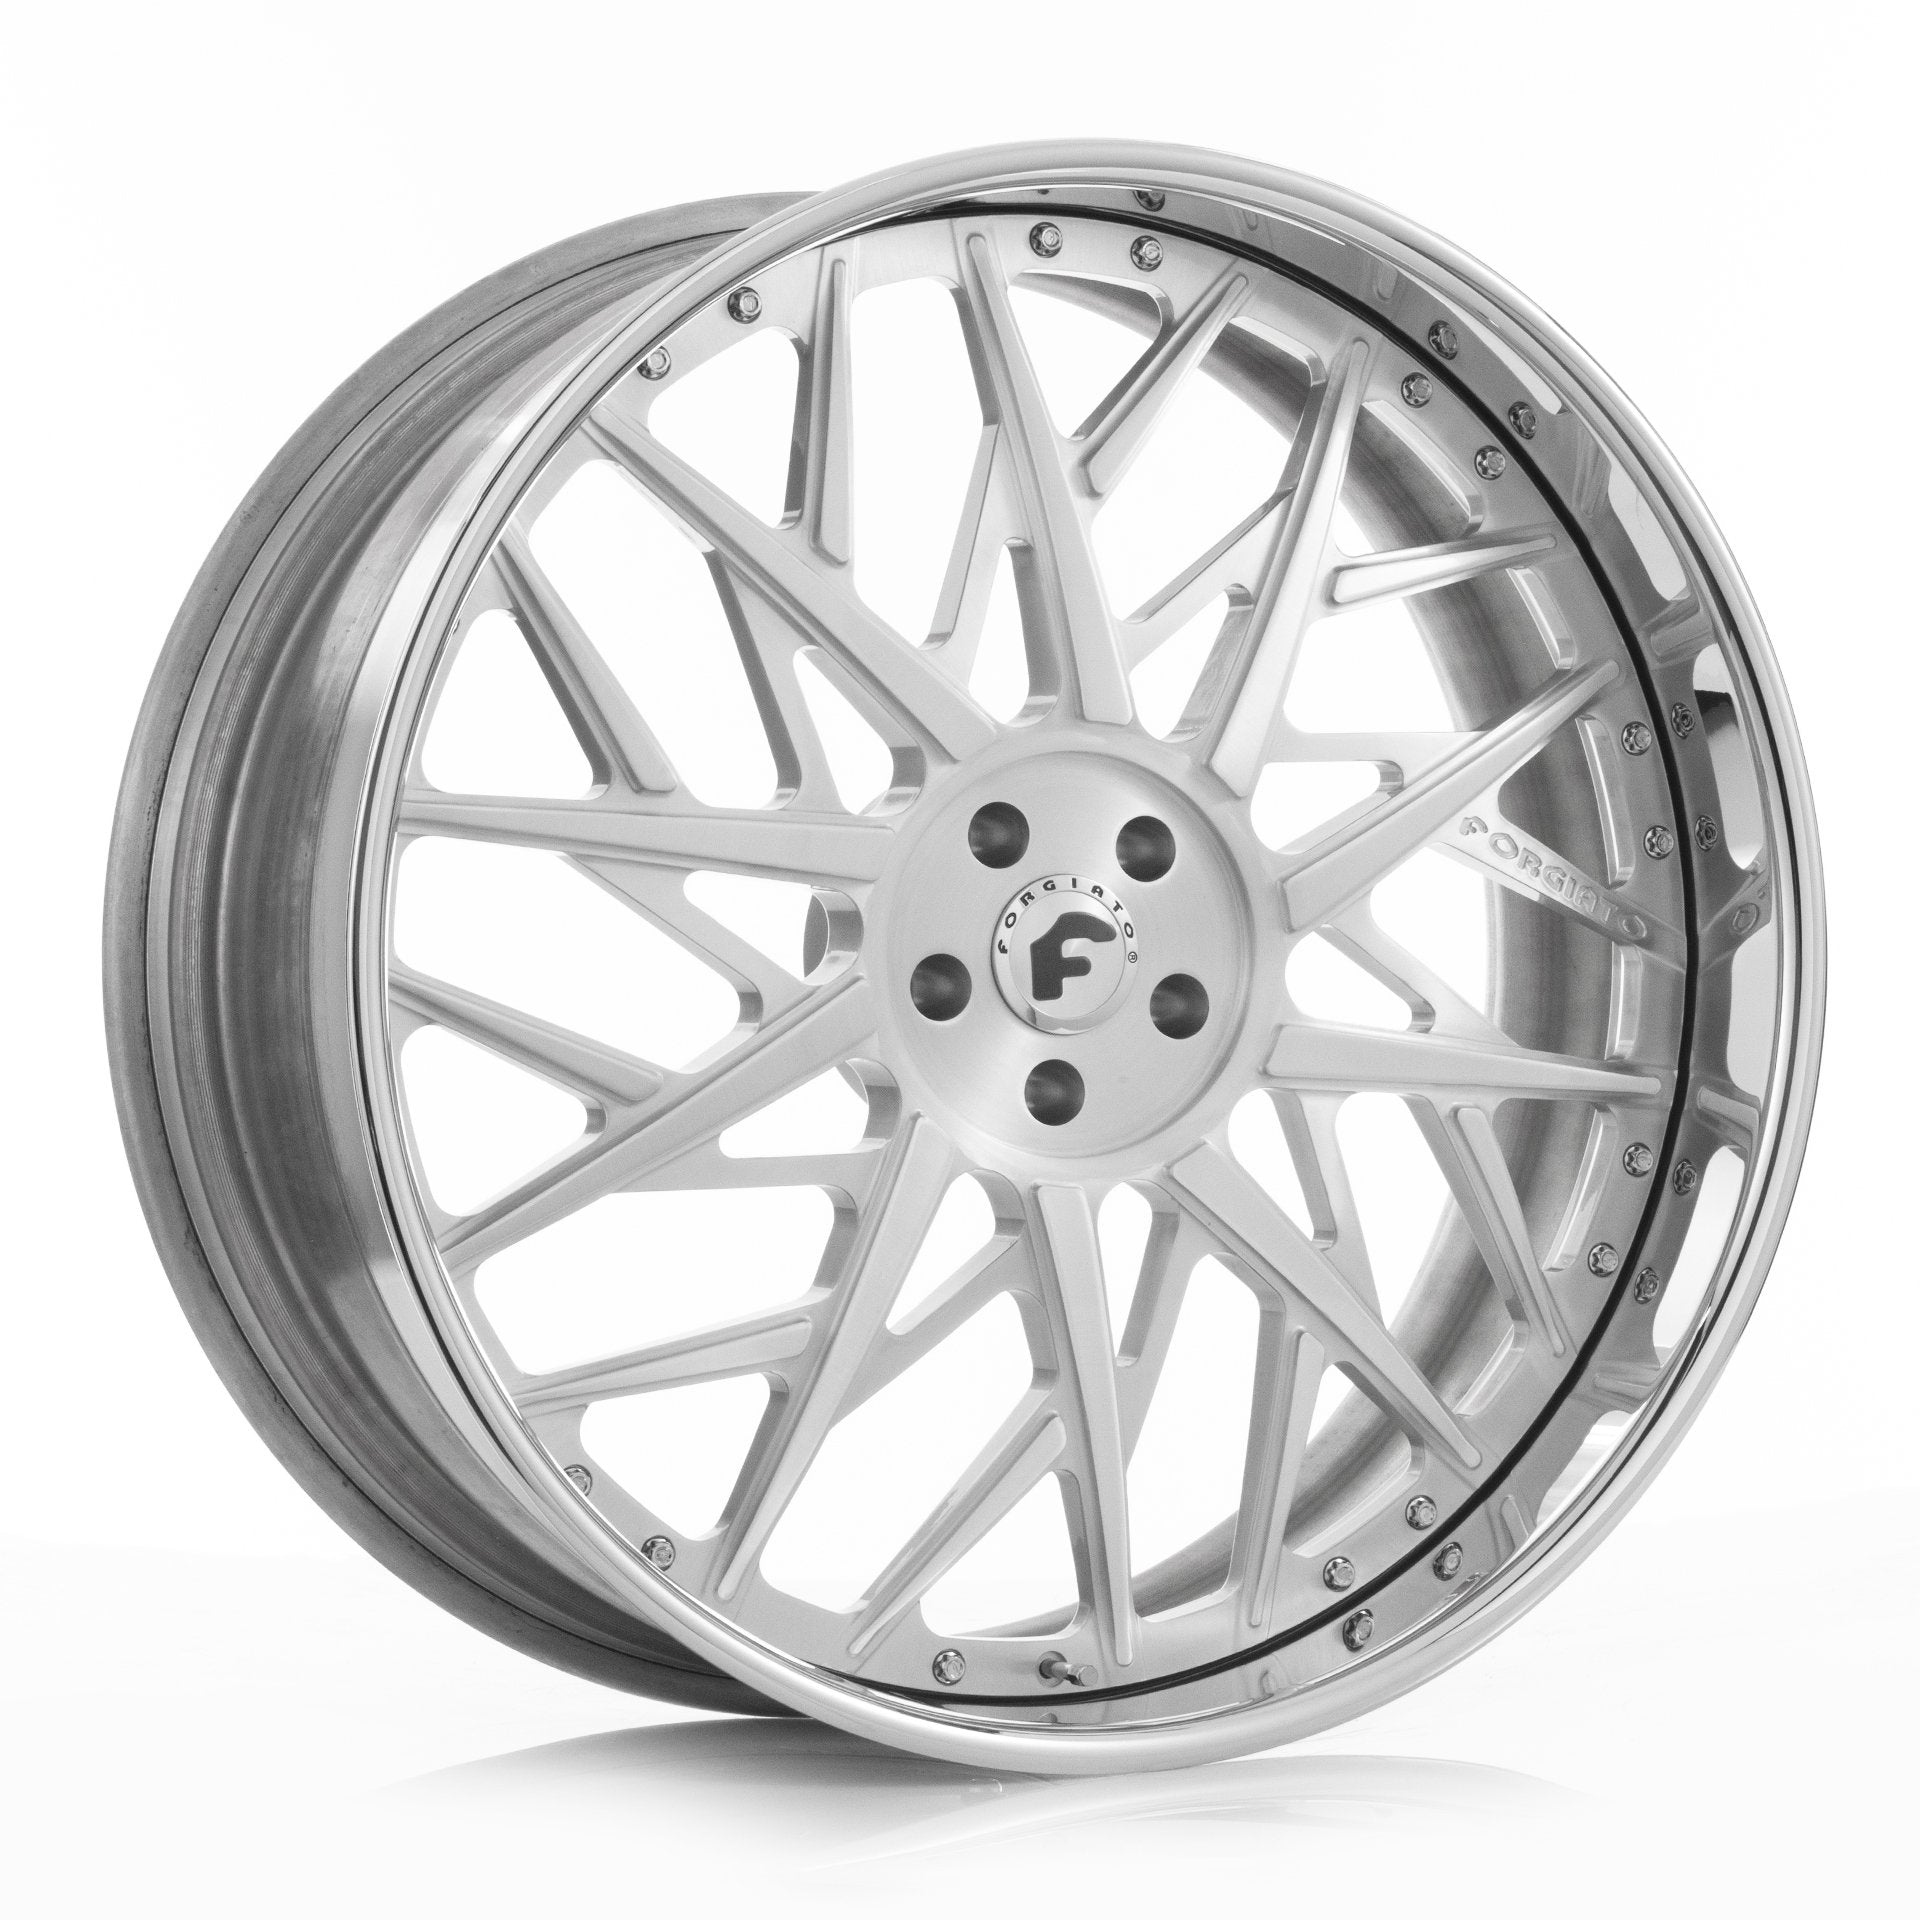 26" Set of Blocco for 1987 Caprice (Flat Forging) - Wheels | Rims